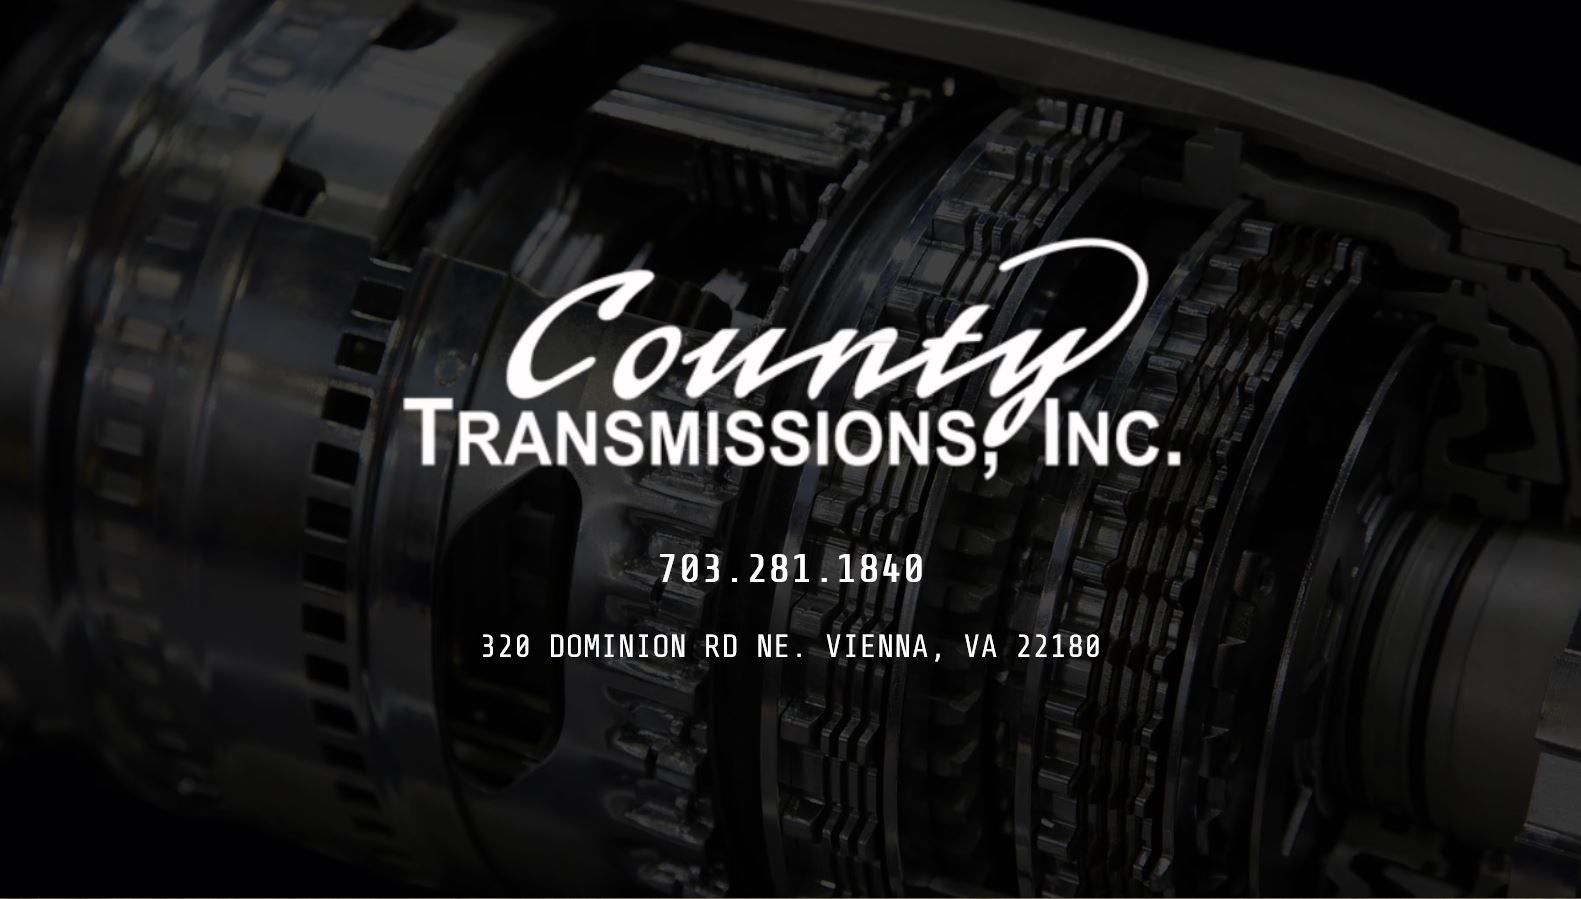 County Transmissions